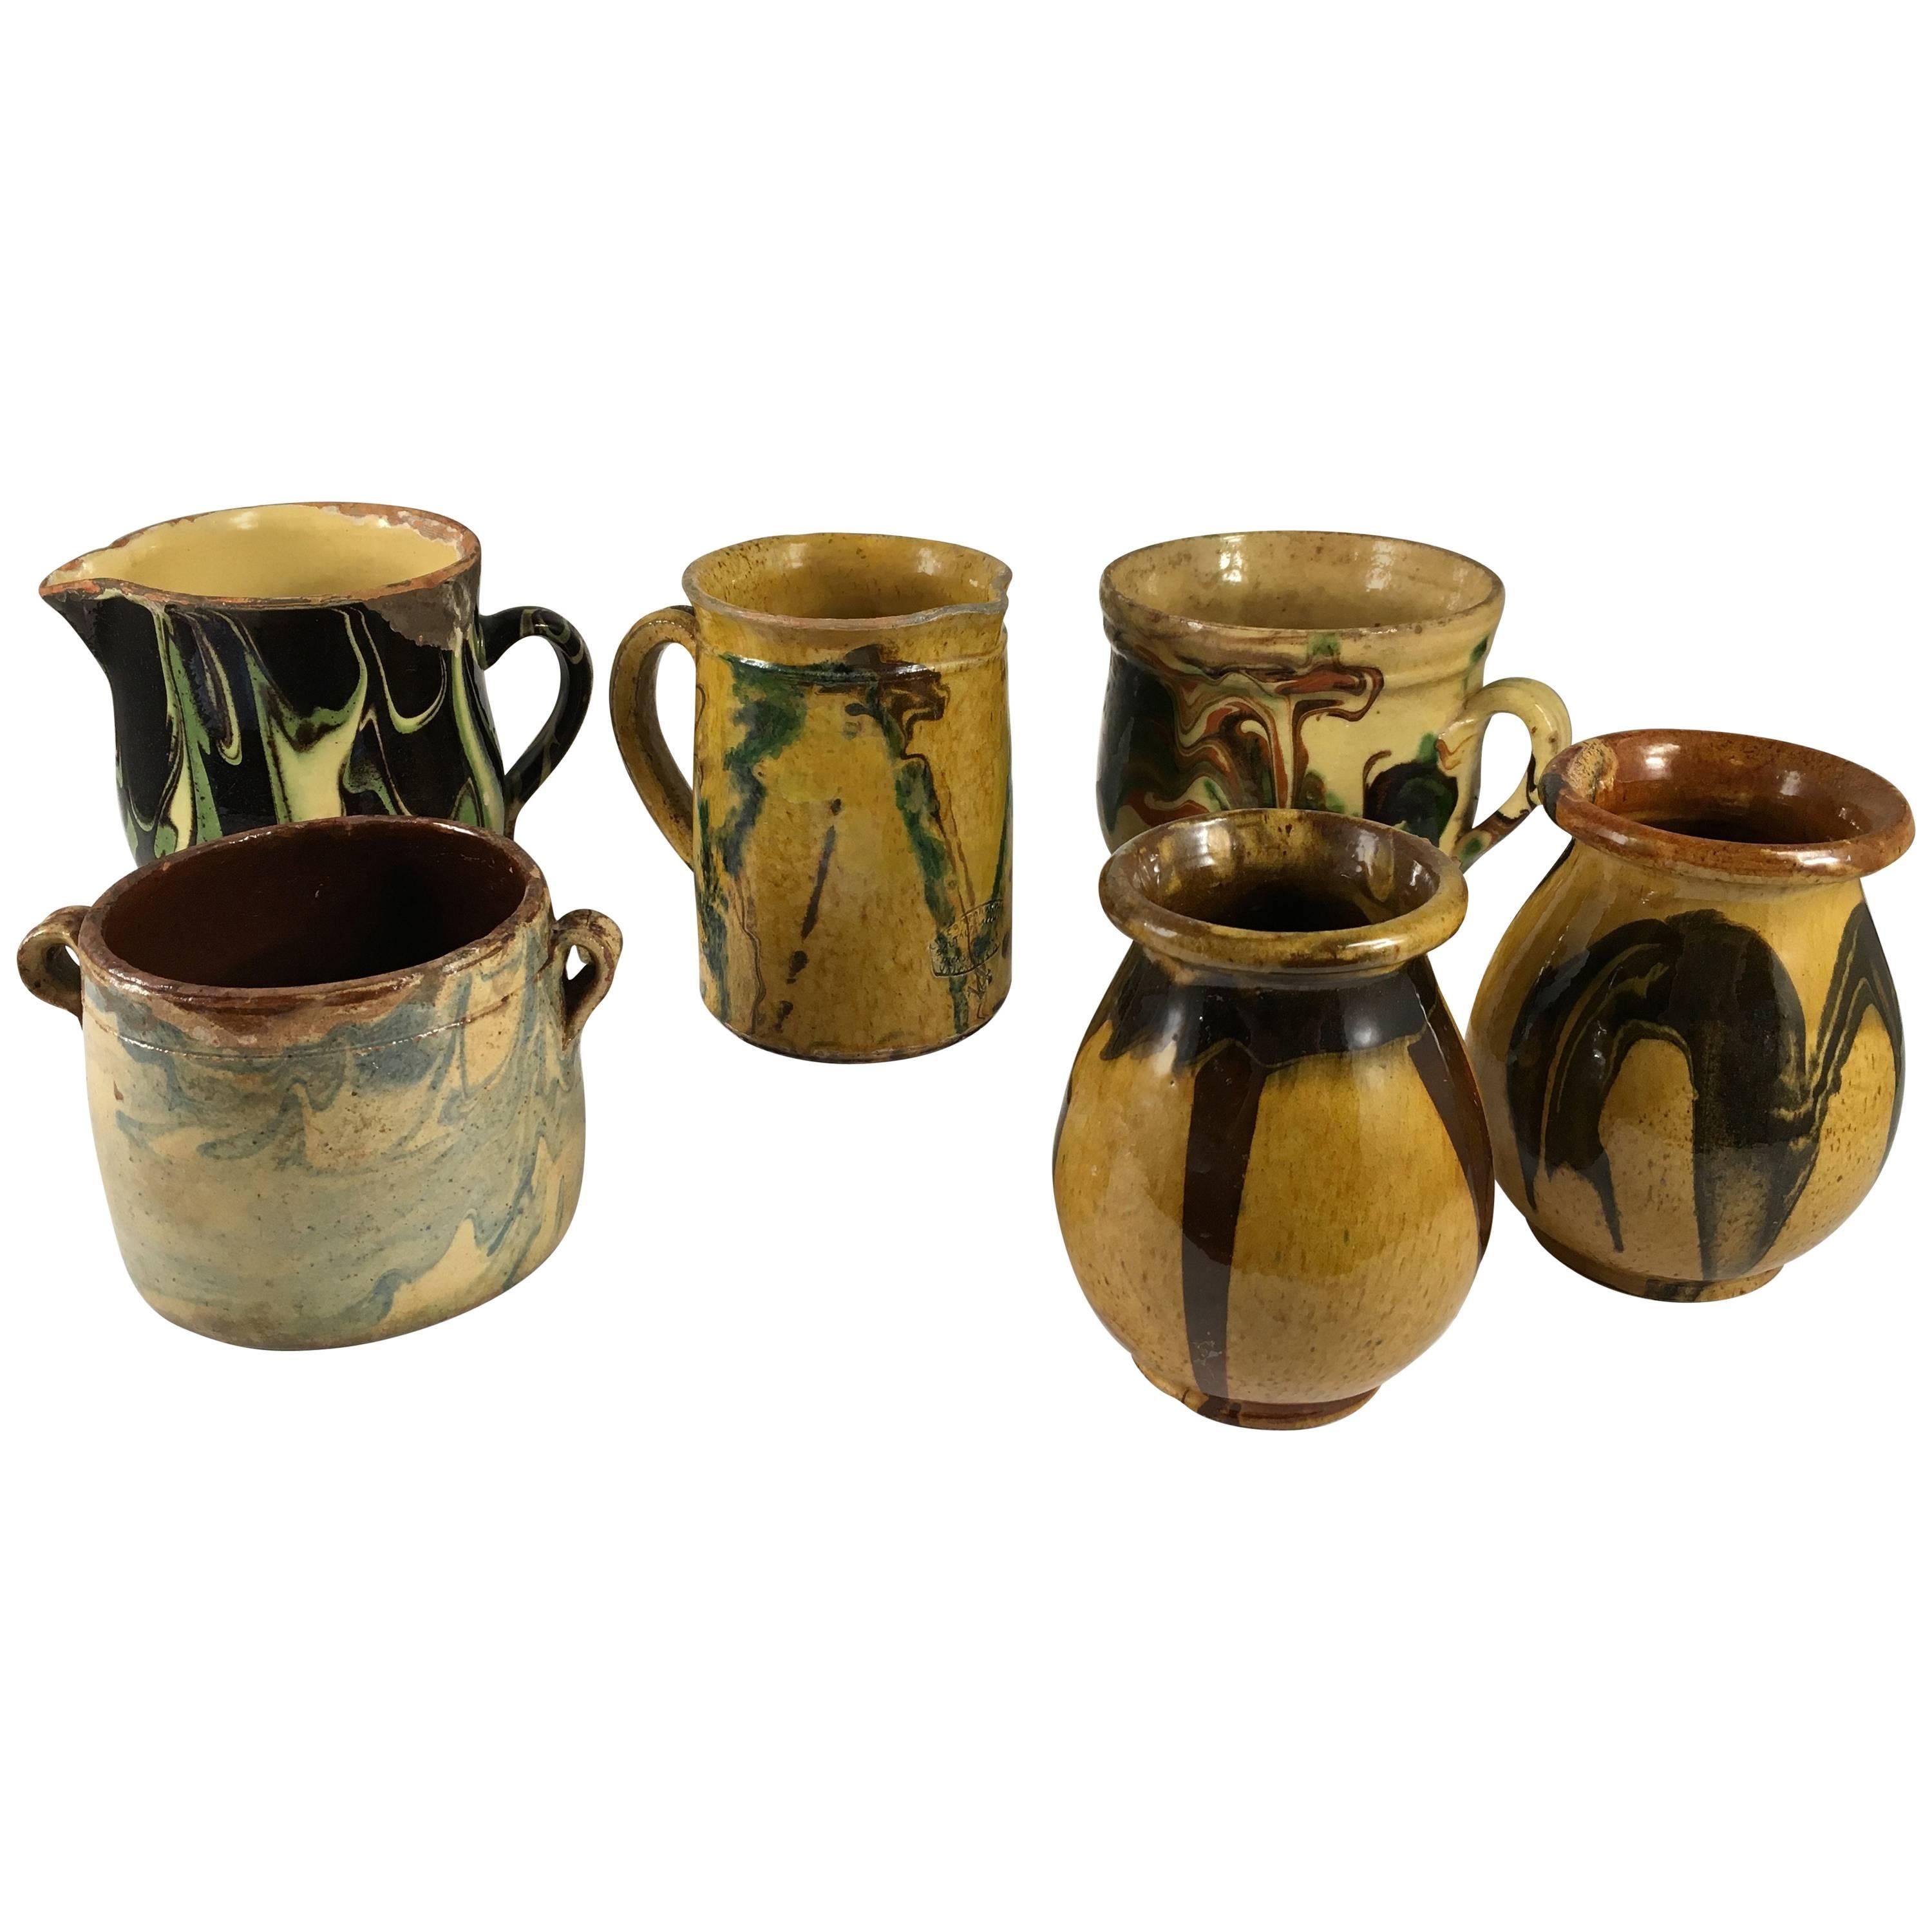 Collection of six French Provincial Jaspe Pots and Pitchers, 19th century